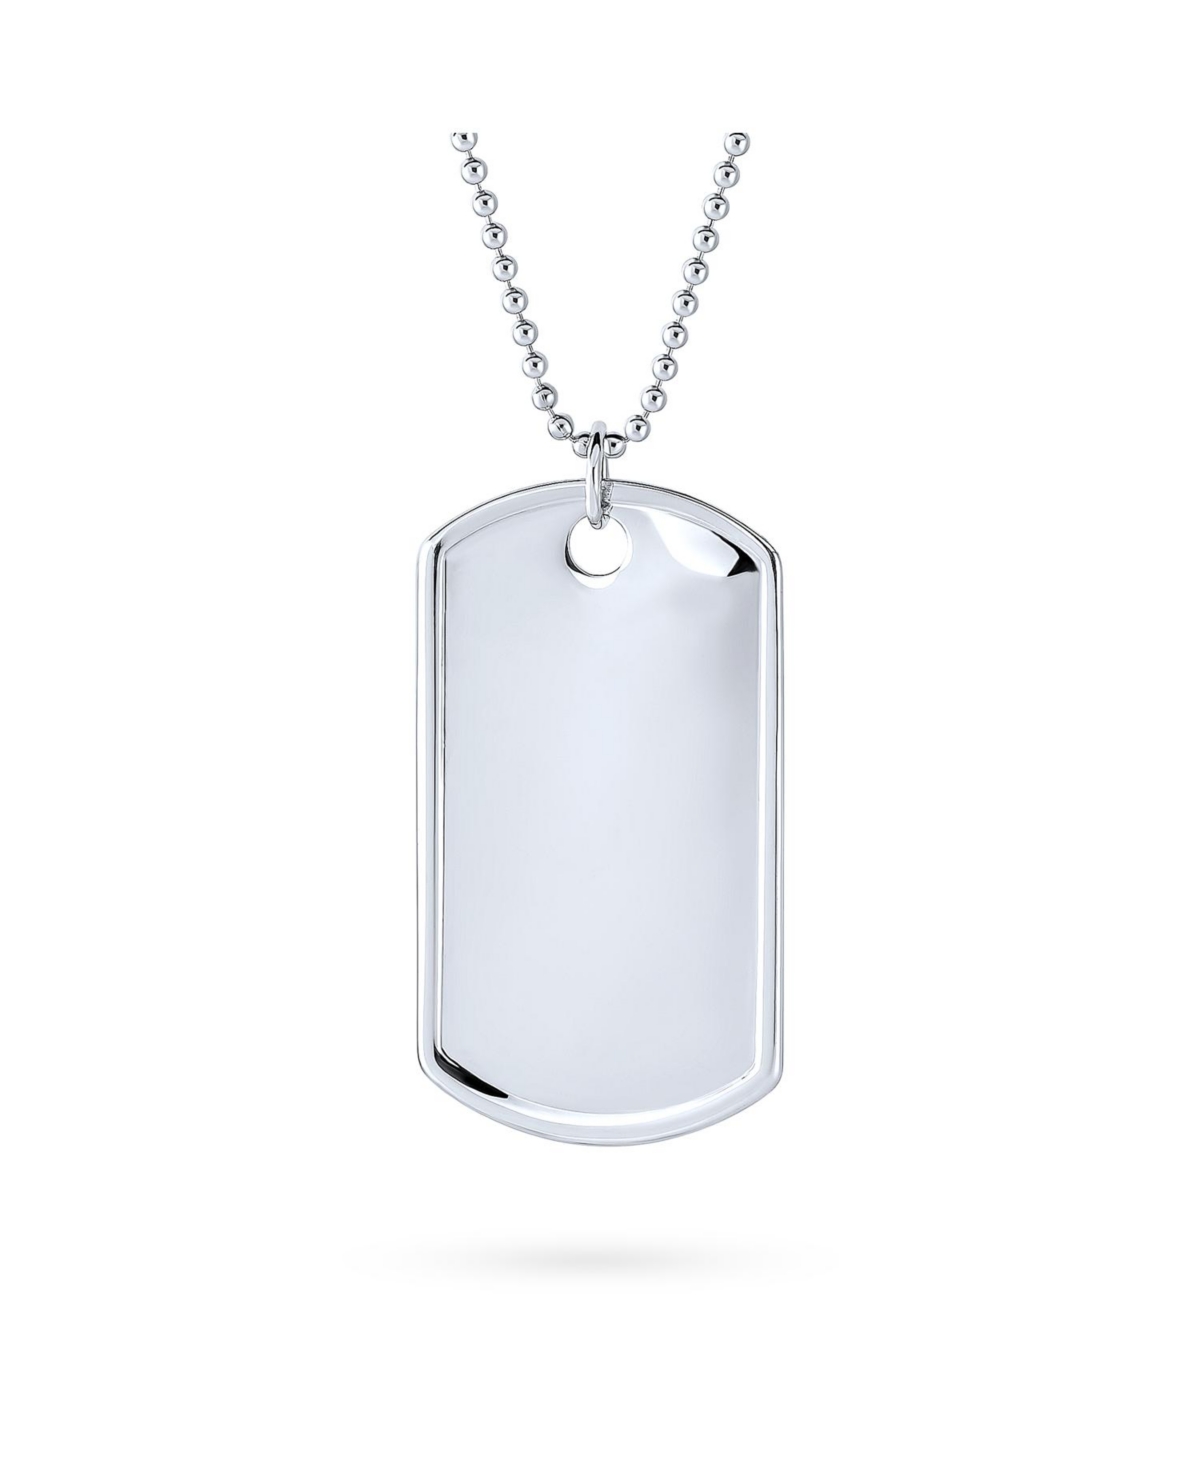 Traditional Mens X-Large Army Military Dog Tag Pendant Necklace For Men Teens .925 Sterling Silver Long Bead Ball Chain 20 Inch - Silver